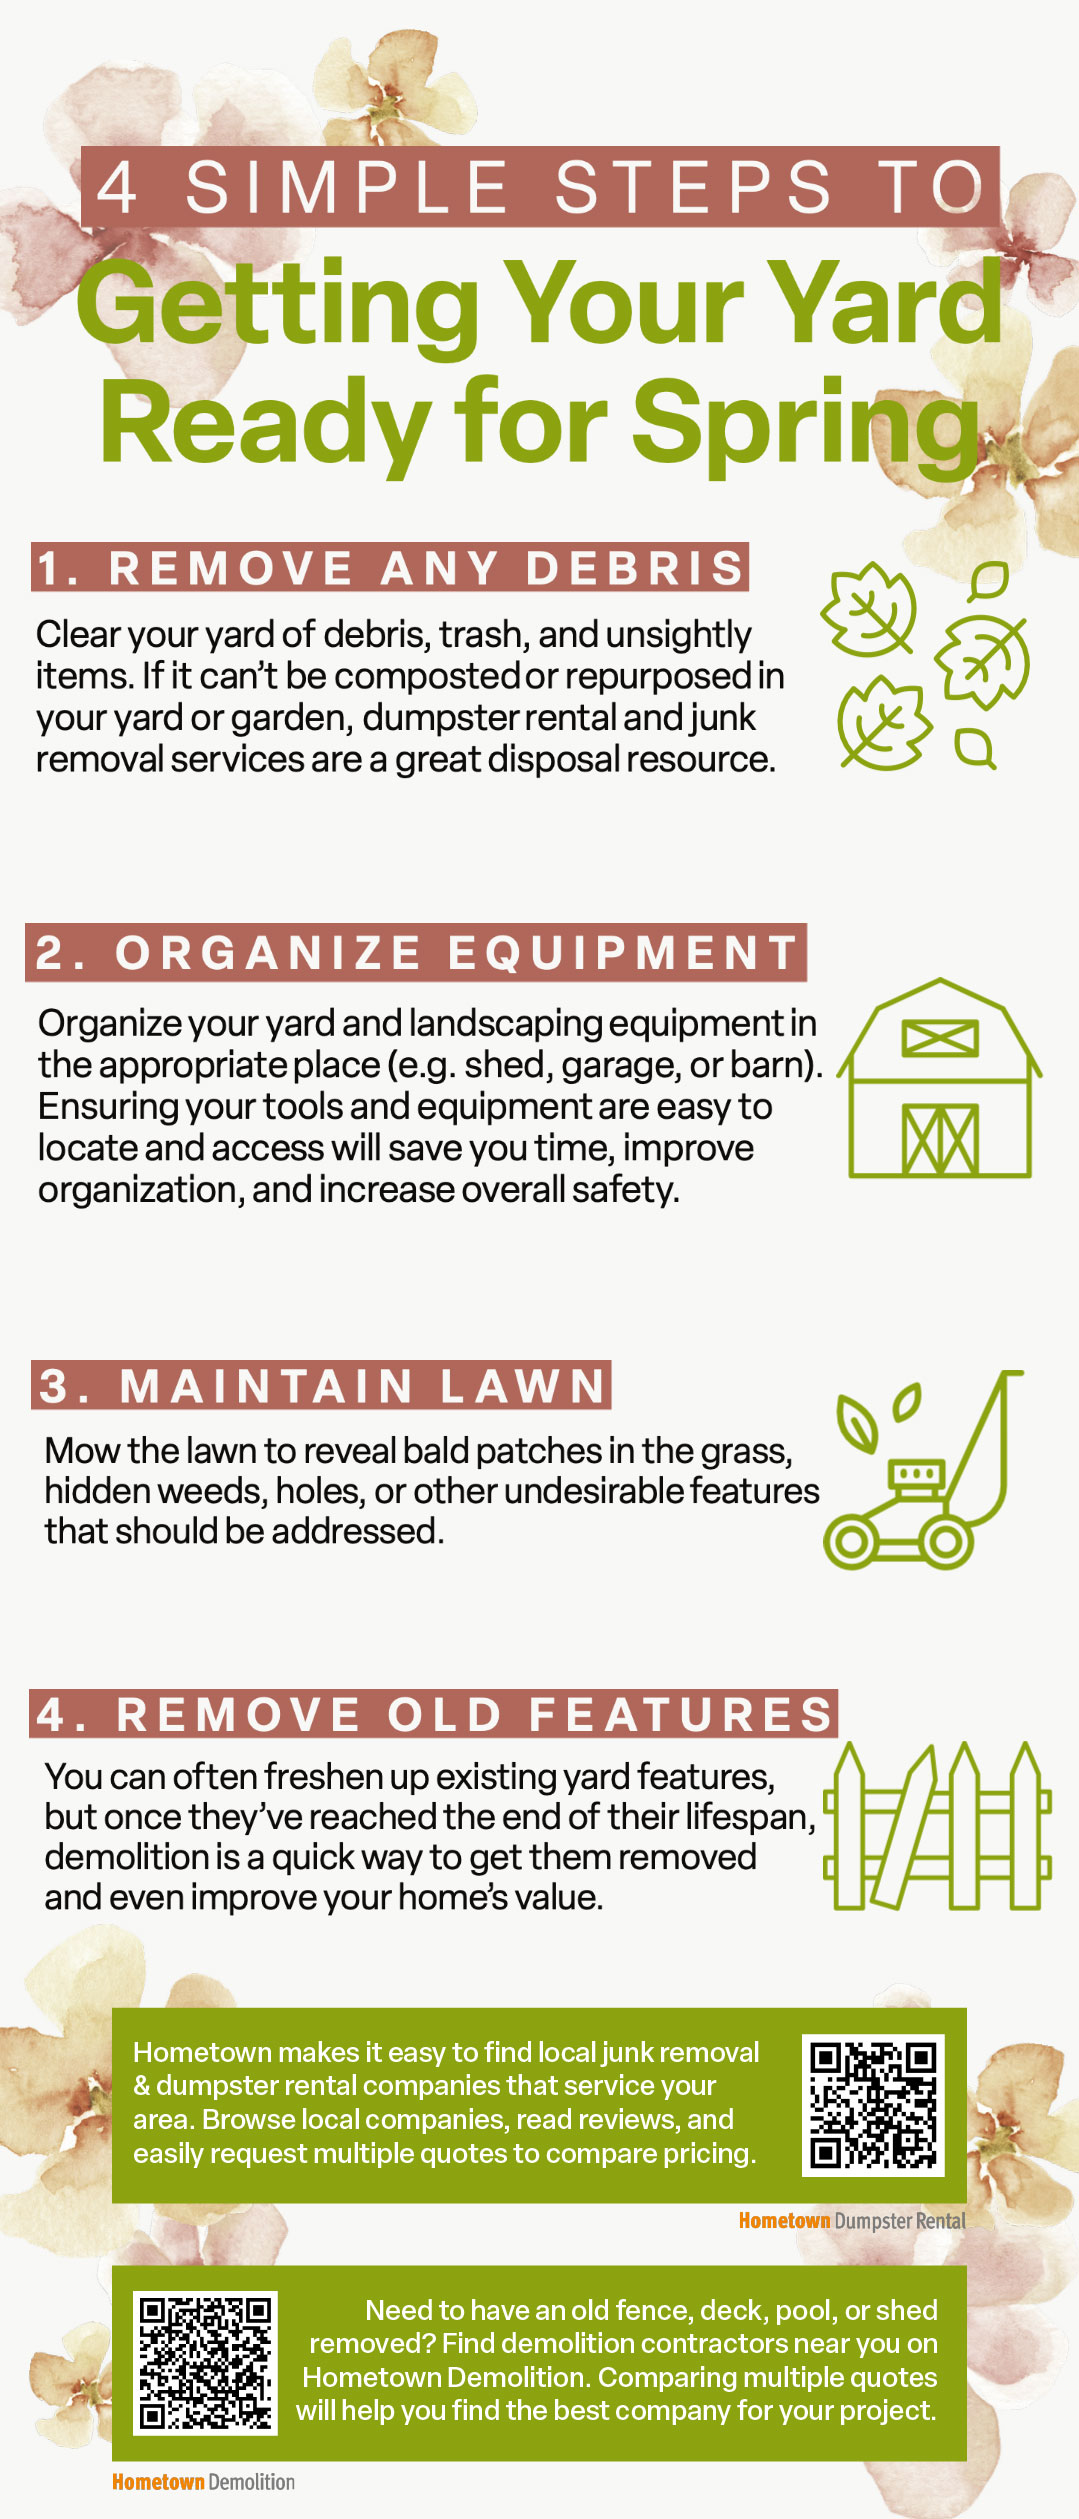 Get Your Yard Ready for Spring in 4 Simple Steps Infographic